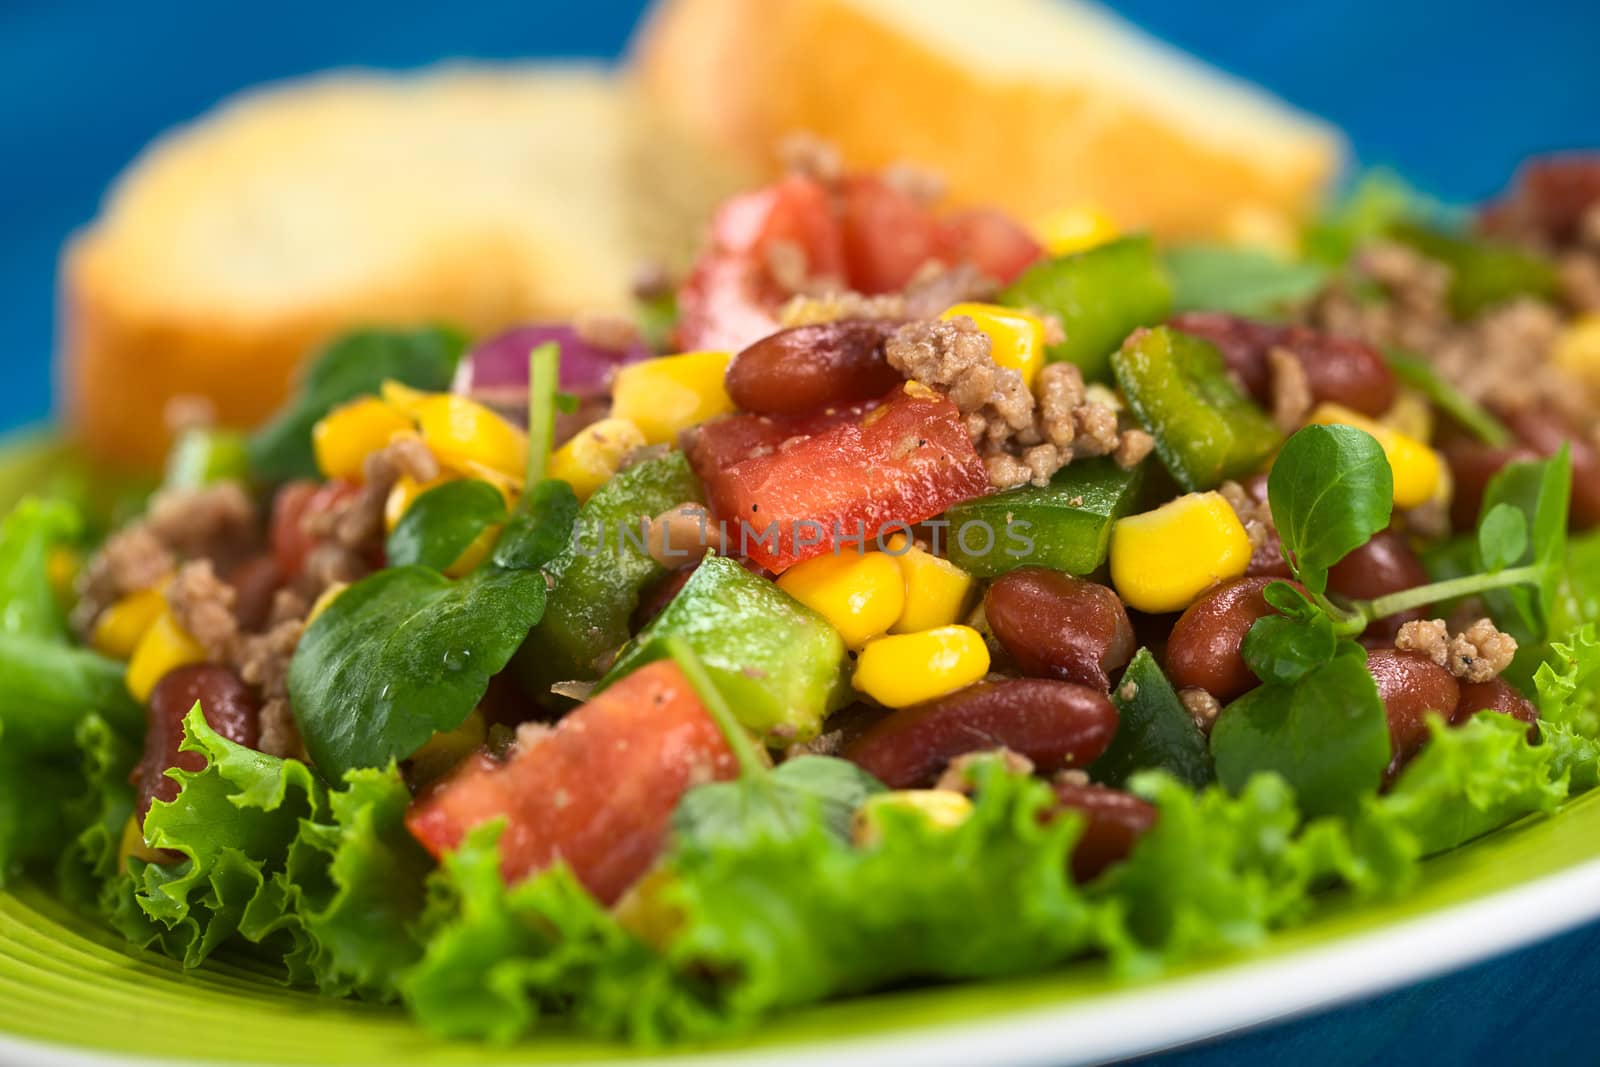 Chili con carne salad made of mincemeat, kidney beans, watercress, green bell pepper, tomato, sweet corn and red onions served on lettuce on a plate with baguette slices in the back (Selective Focus, Focus on the tomato piece in the middle of the image)